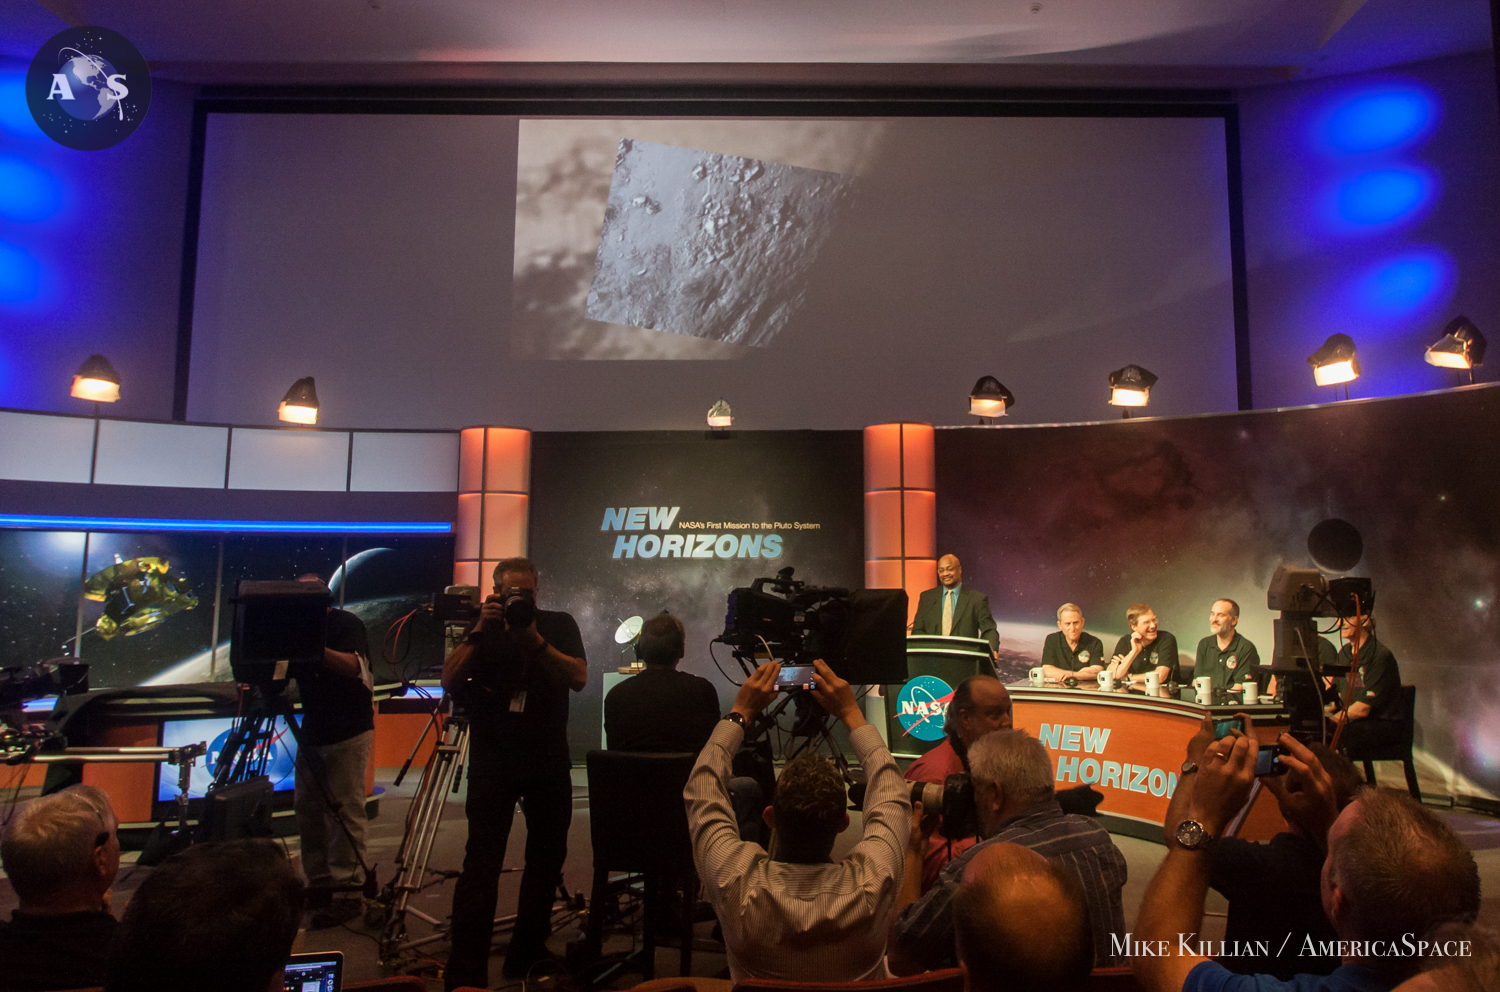 The first ever close-up photo of Pluto's surface revealed to the world at the Johns Hopkins Applied Physics Laboratory in Laurel, MD on July 15, 2015. Photo Credit: Mike Killian / AmericaSpace